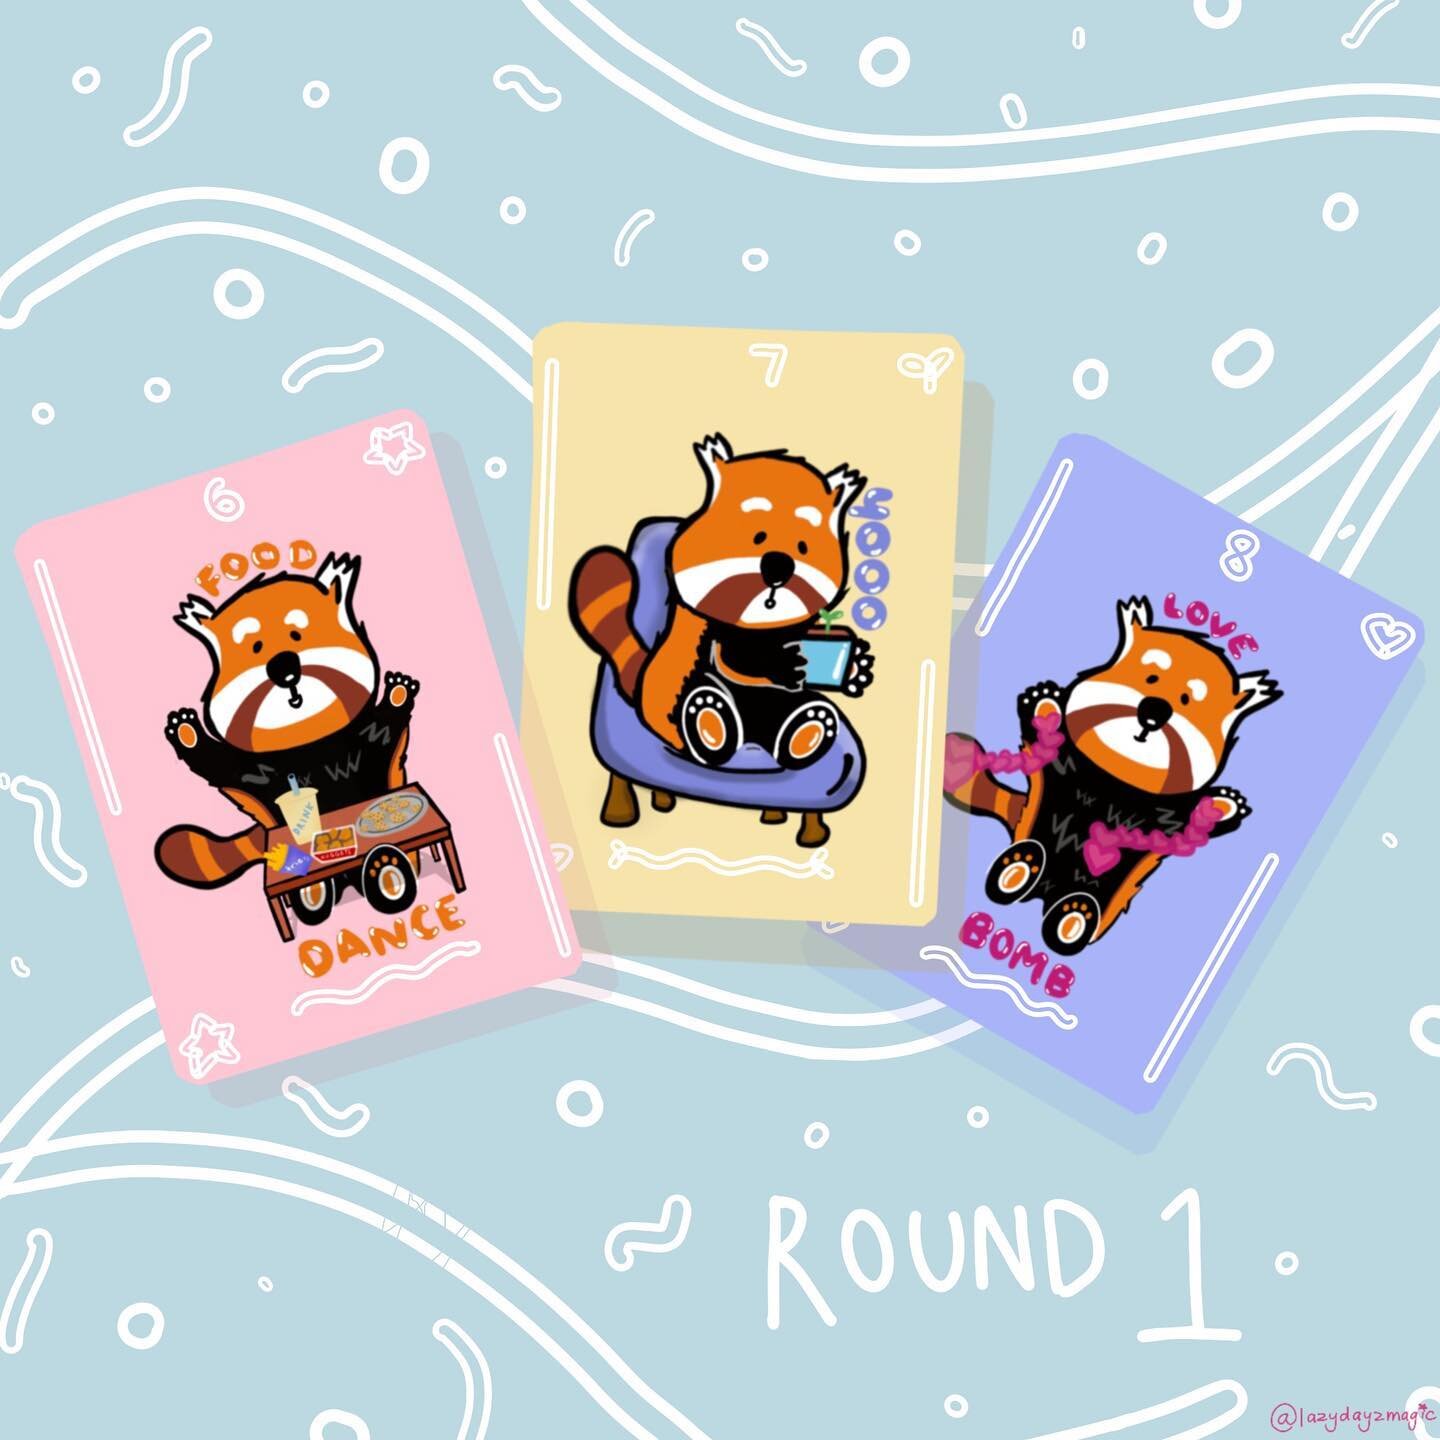 Rico if he had his own card game.
Pick your favourite card 🃏🃏🃏
~ Round 1